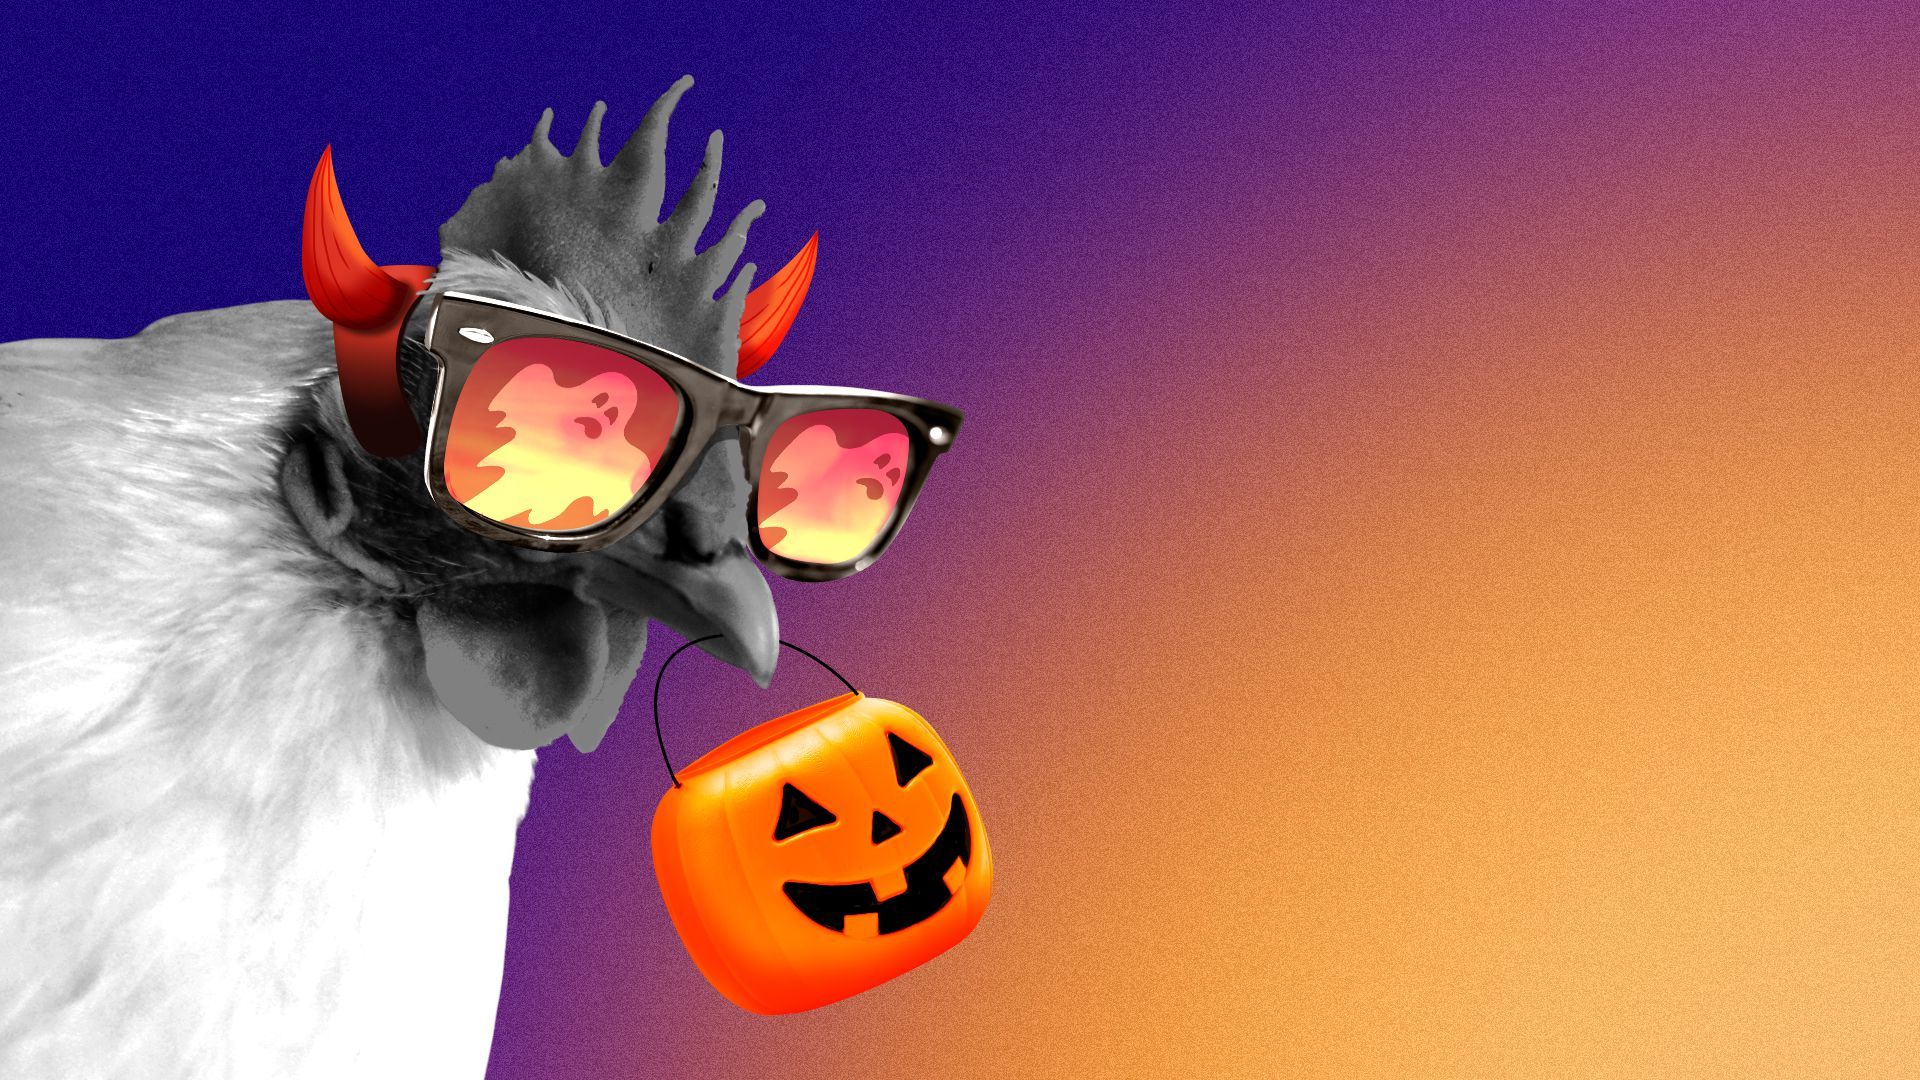 Illustration of a chicken with sunglasses carrying a plastic pumpkin and wearing devil horns, with ghosts reflects in the glasses